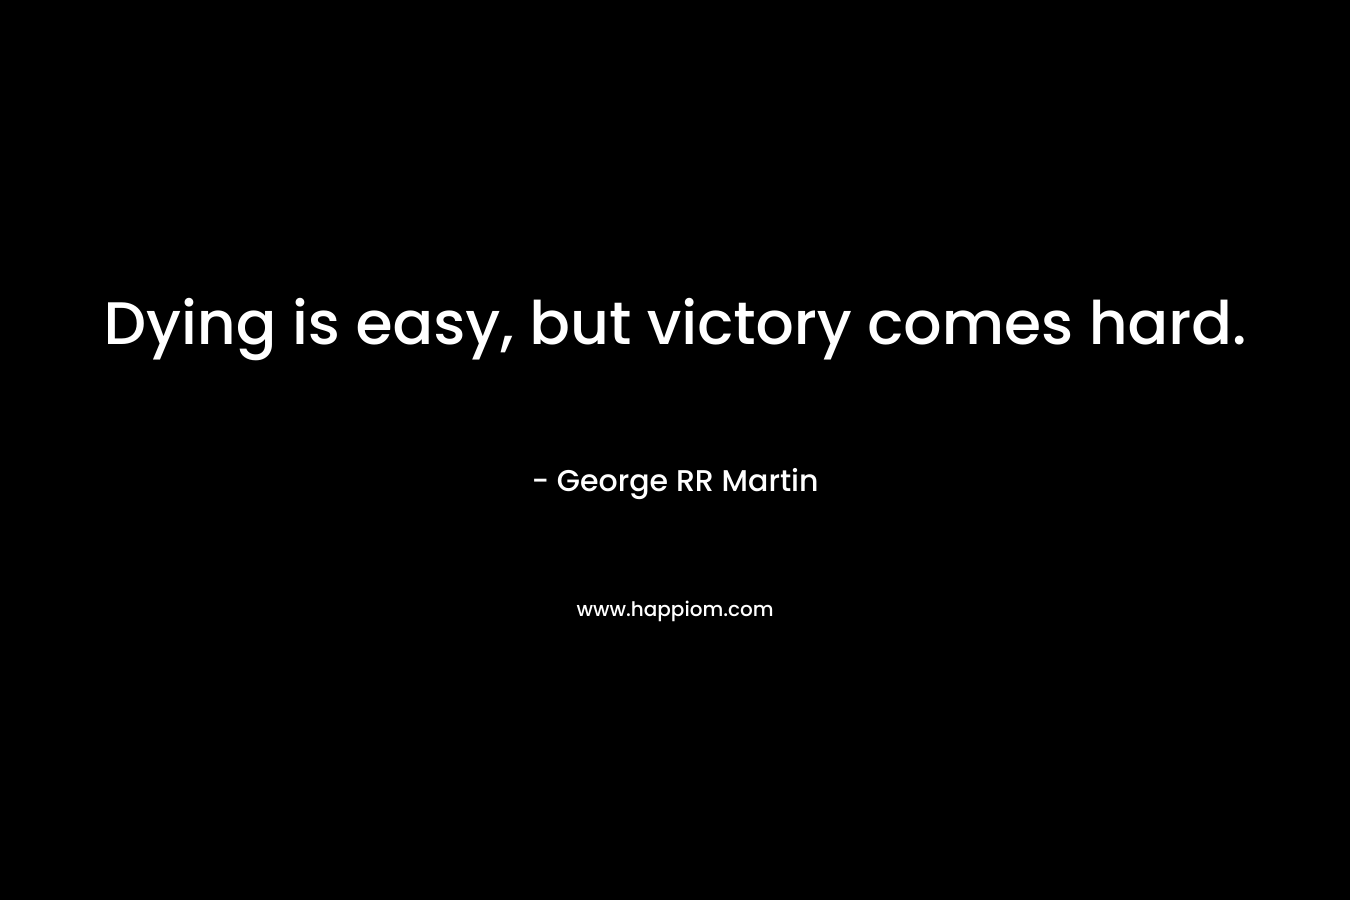 Dying is easy, but victory comes hard. – George RR Martin